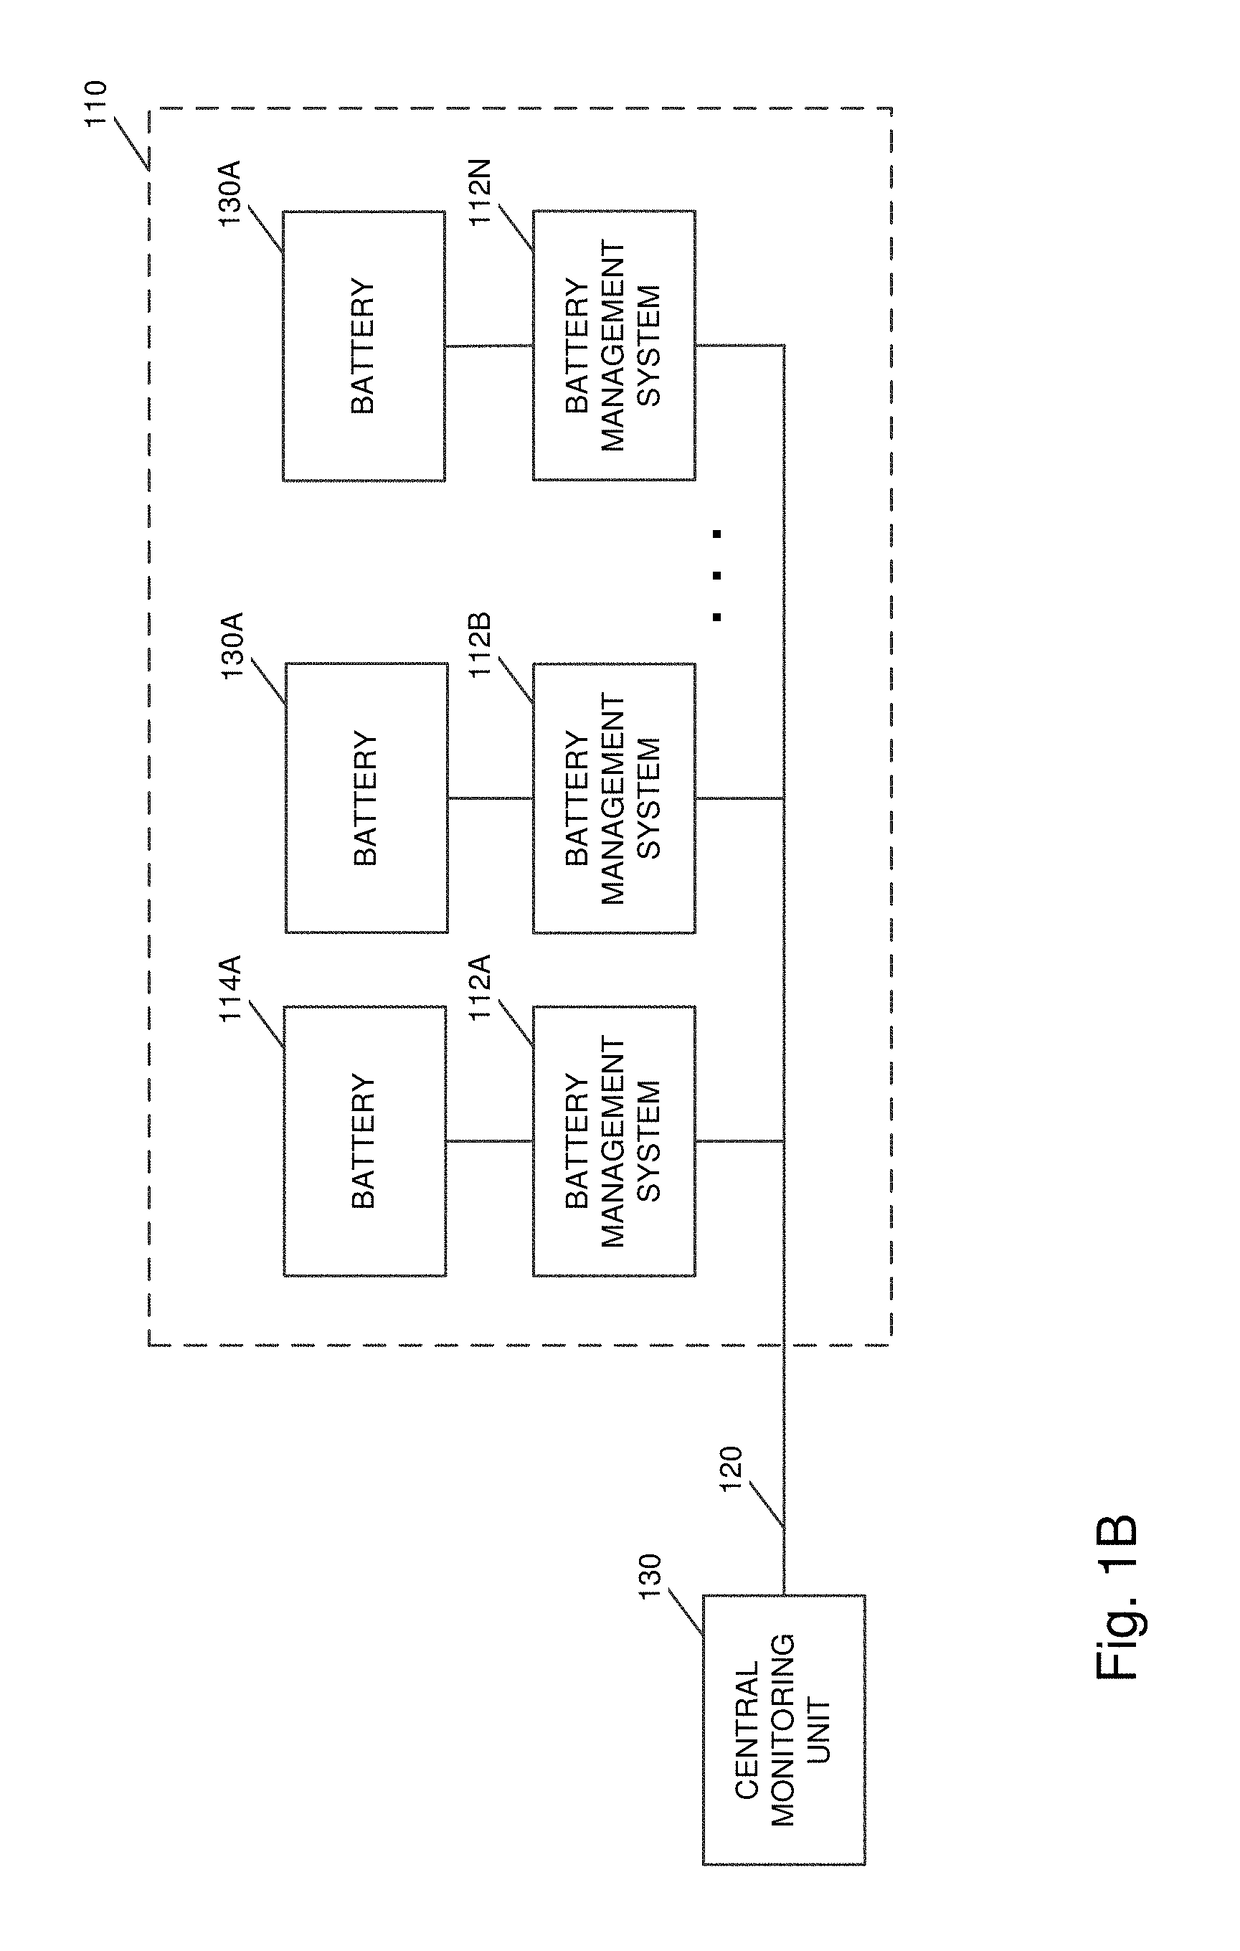 Communication system for battery management systems in electric or hybrid vehicles